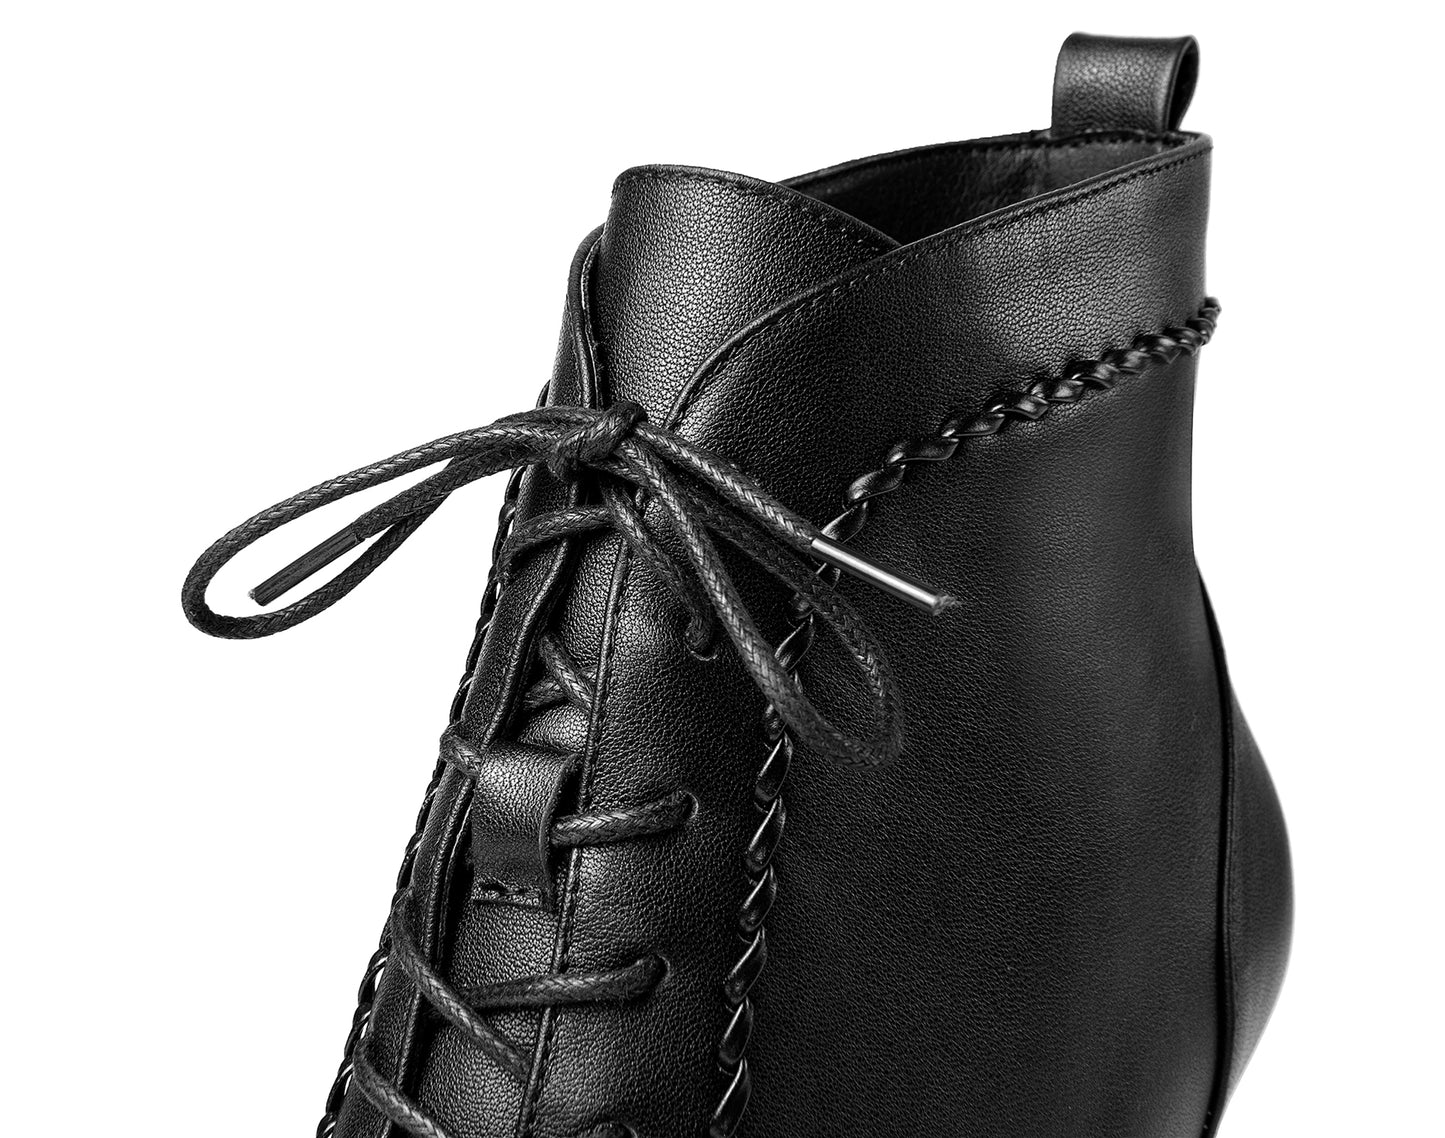 TinaCus Women's Genuine Leather Sexy Stiletto Heel Handmade Zip Up Pointed Toe Booties with Selftie Design